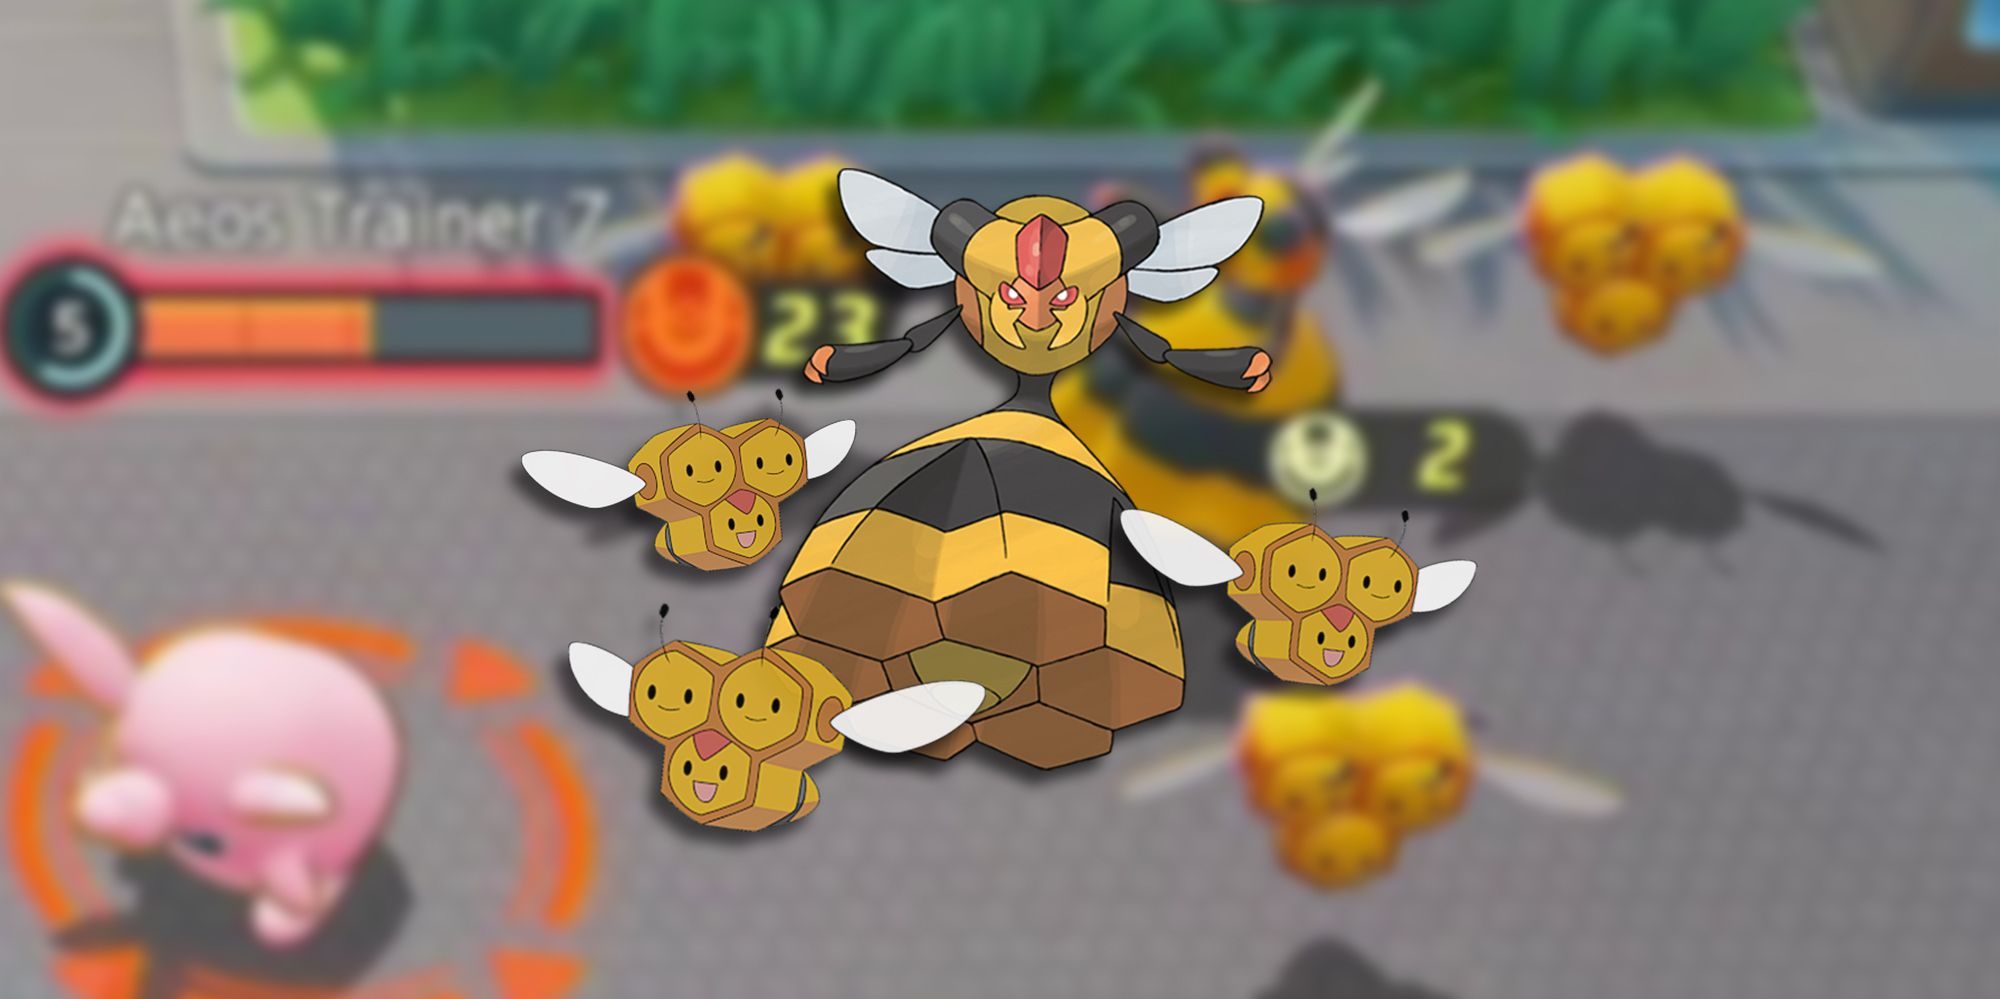 pokemon-unite-combee-and-vespiqueen-nan-game-with-pngs-of-the-pokemon-overlaid-on-top-9686297